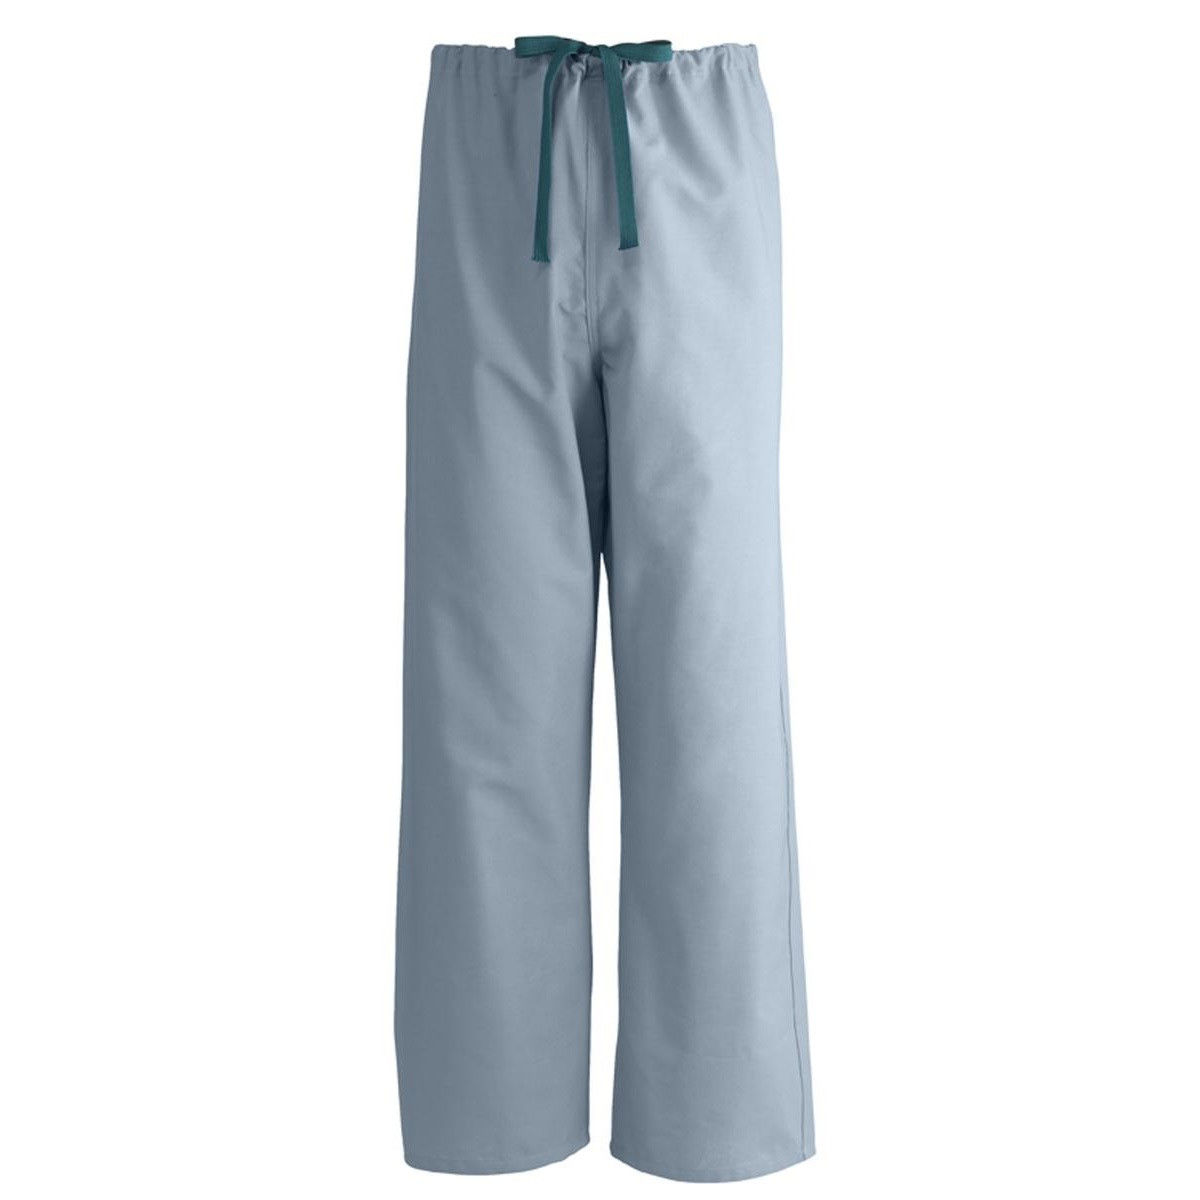 What materials make up the misty green scrubs, EconoBlen Unisex Reversible Scrub Pants?